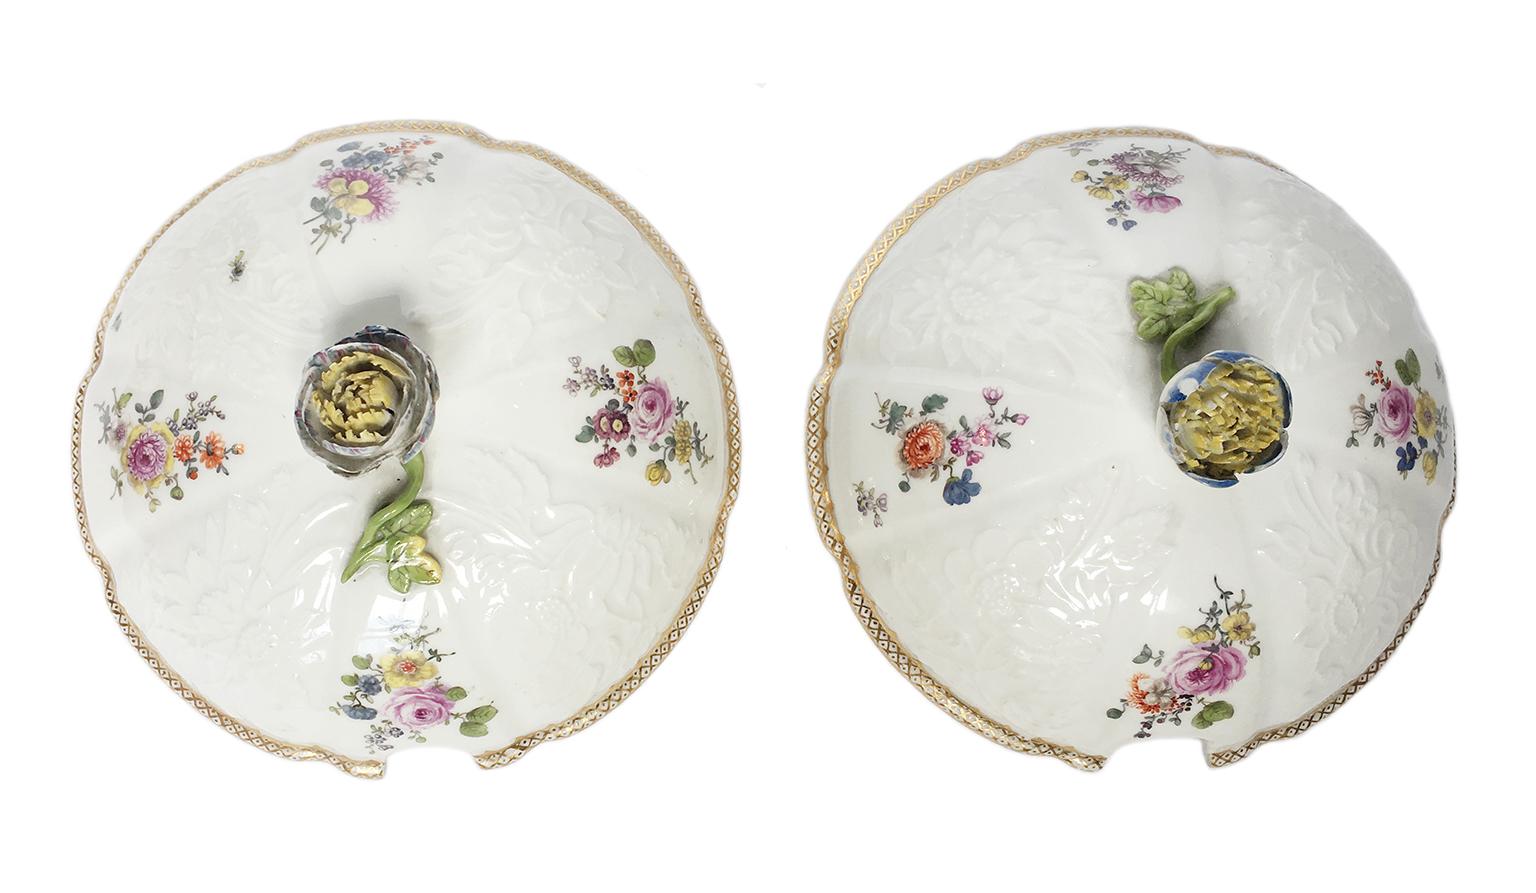 Ancient Meissen Pair of Porcelain Sugar Bowls with Flower Knobs, Circa 1760 For Sale 4